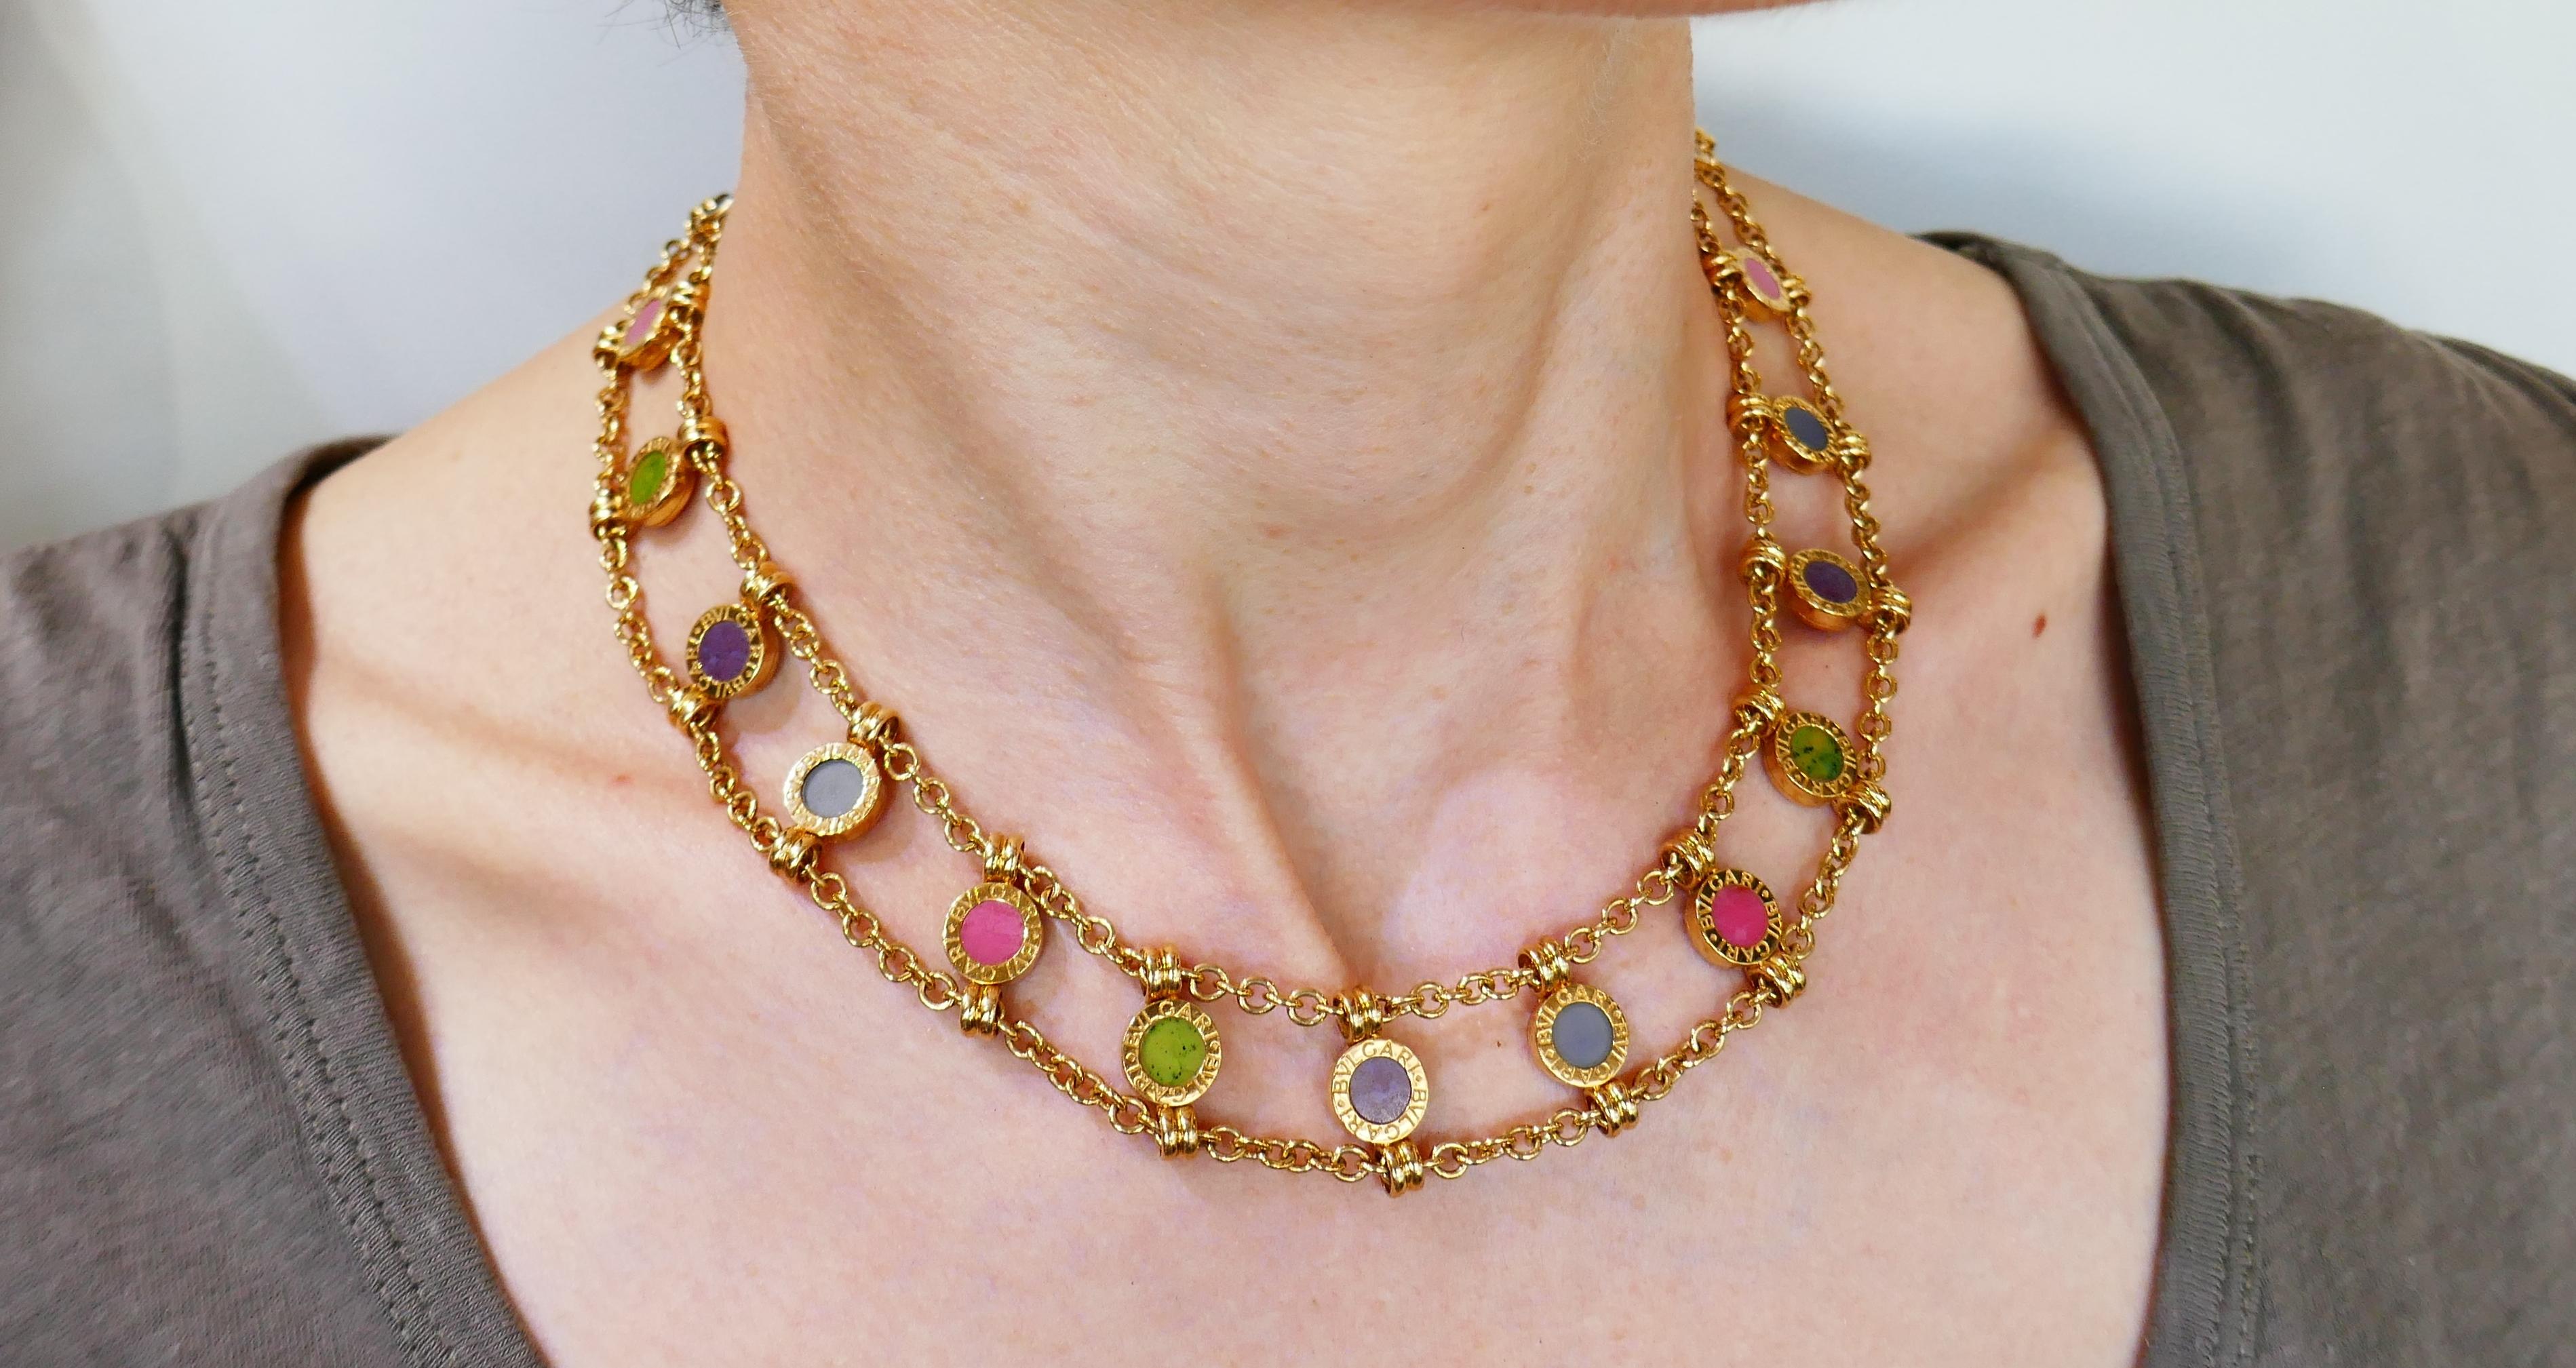 Fabulous colorful necklace created by Bvlgari in Italy in the 1980s. 
Made of 18 karat yellow gold and set with various gemstones. 
Measurements: 15-3/4 x 3/4 inches (40 x 1.8 cm).
Weight 78.1 grams.
Stamped with Bvlgari maker's mark, hallmark for